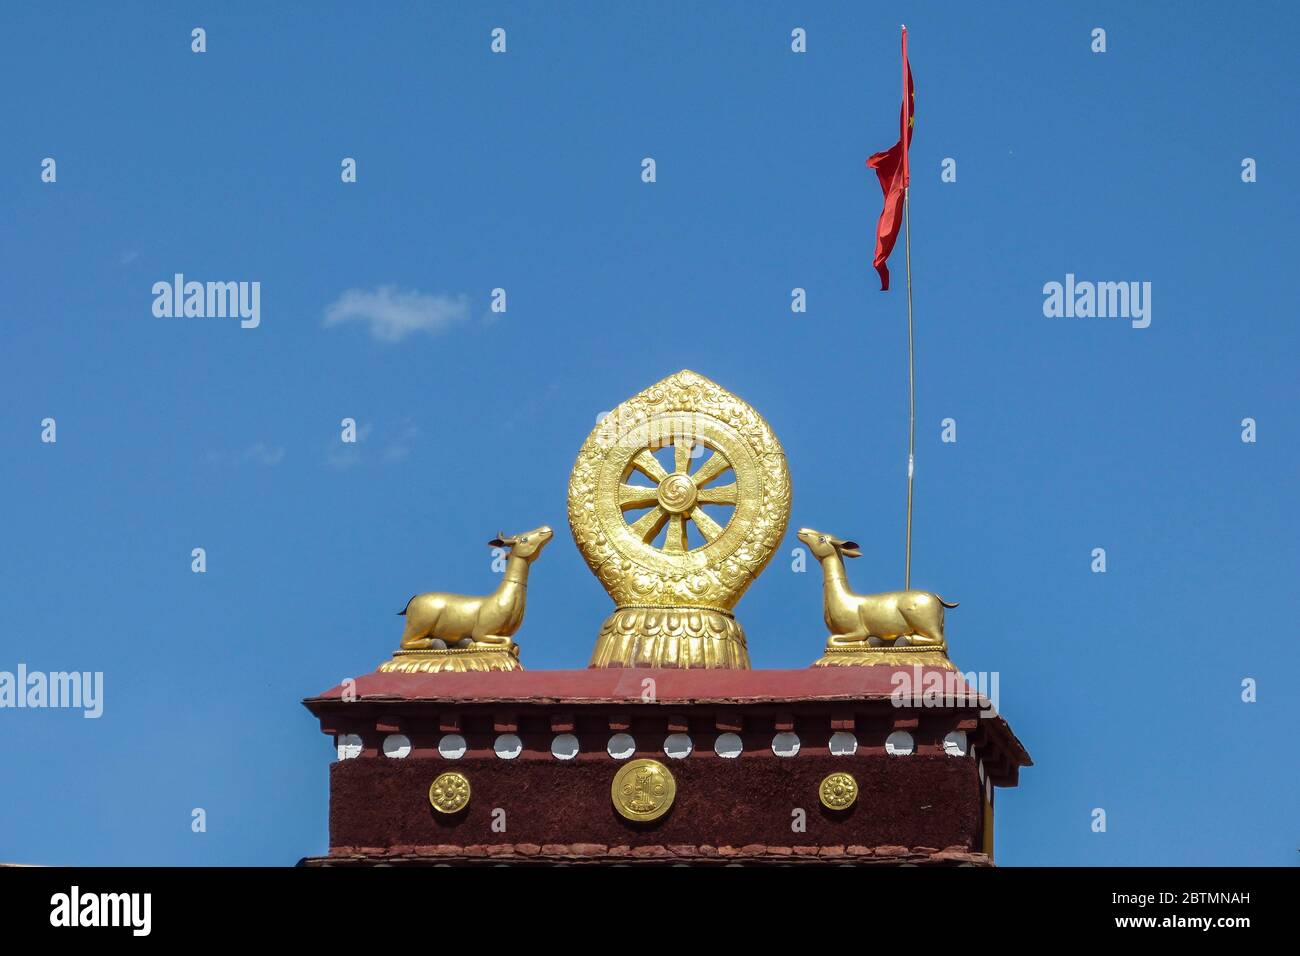 Dharmachakra, or Wheel of Law which represents the teachings of the Buddha and endless cycle on the gilded roof of Jokhang Temple, Lhasa, Tibet Stock Photo